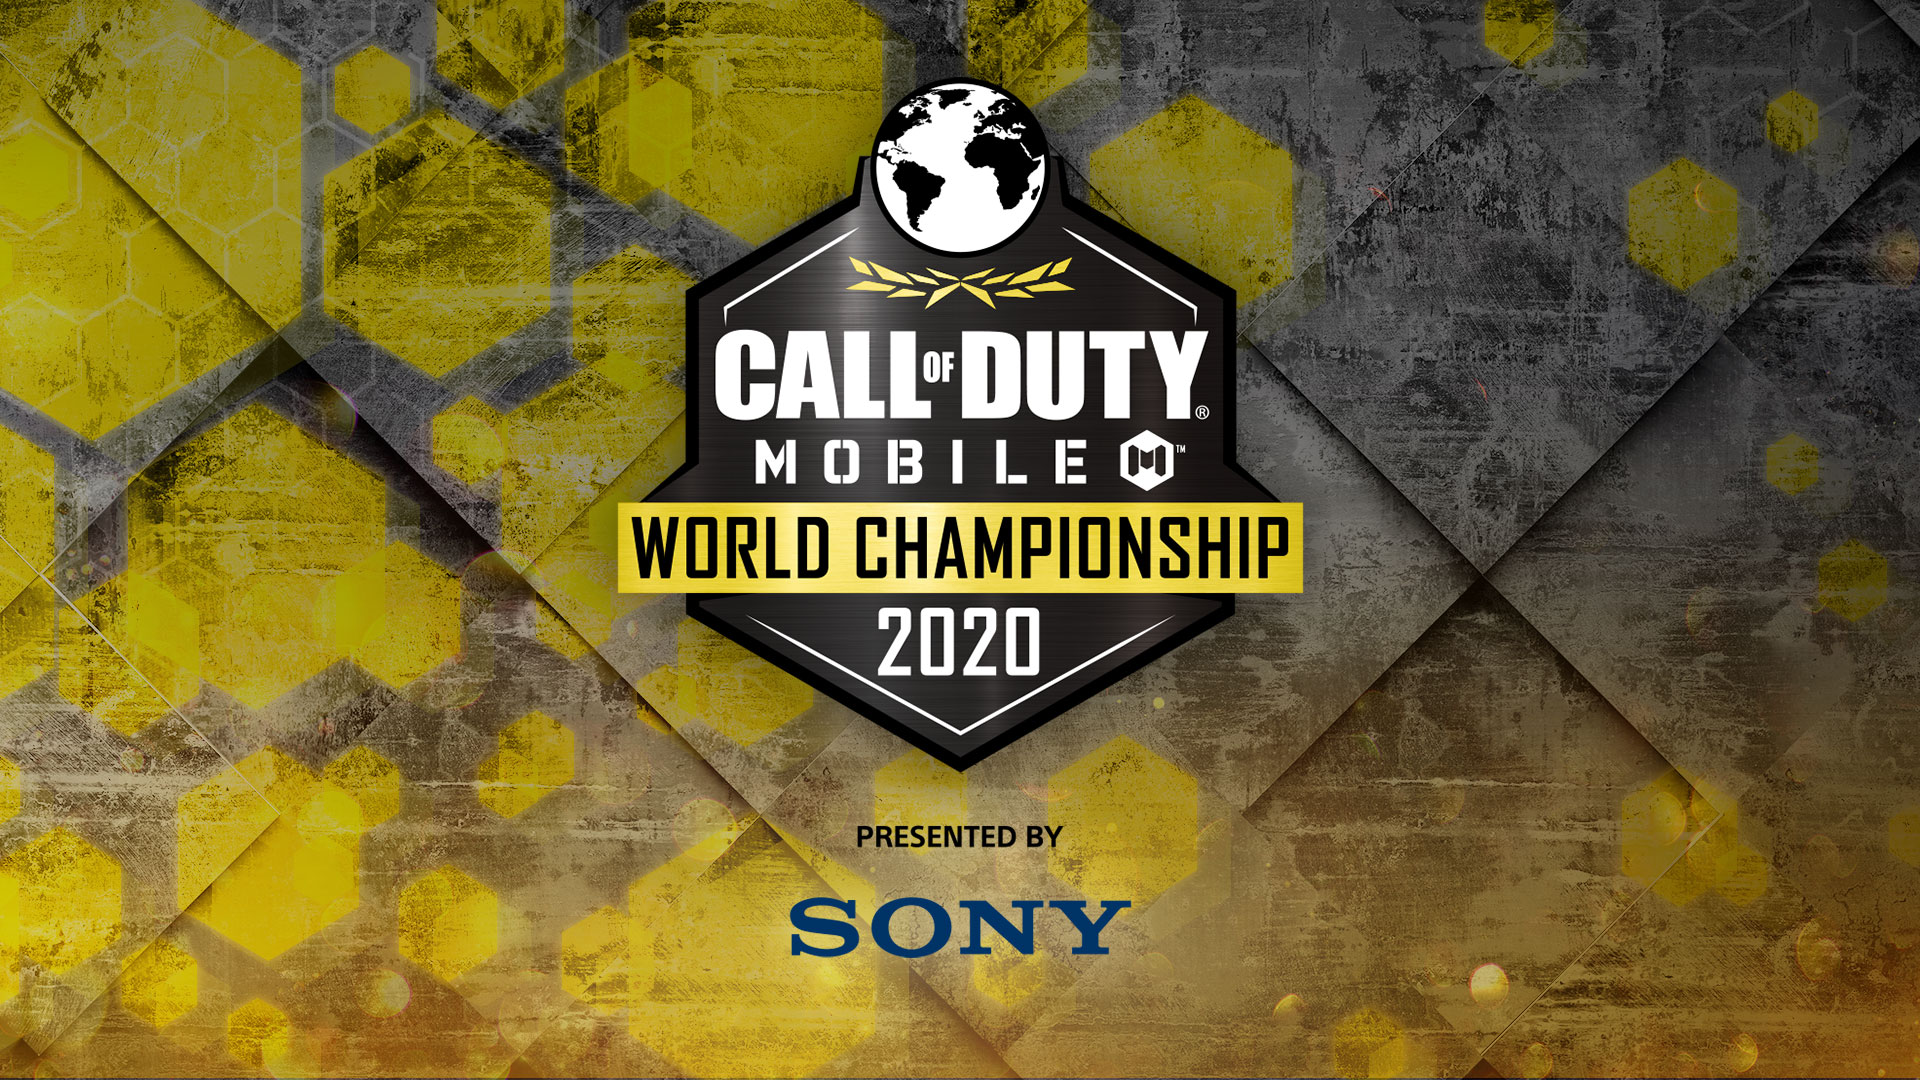 Announcing the Call of Duty® Mobile World Championship 2020 Tournament